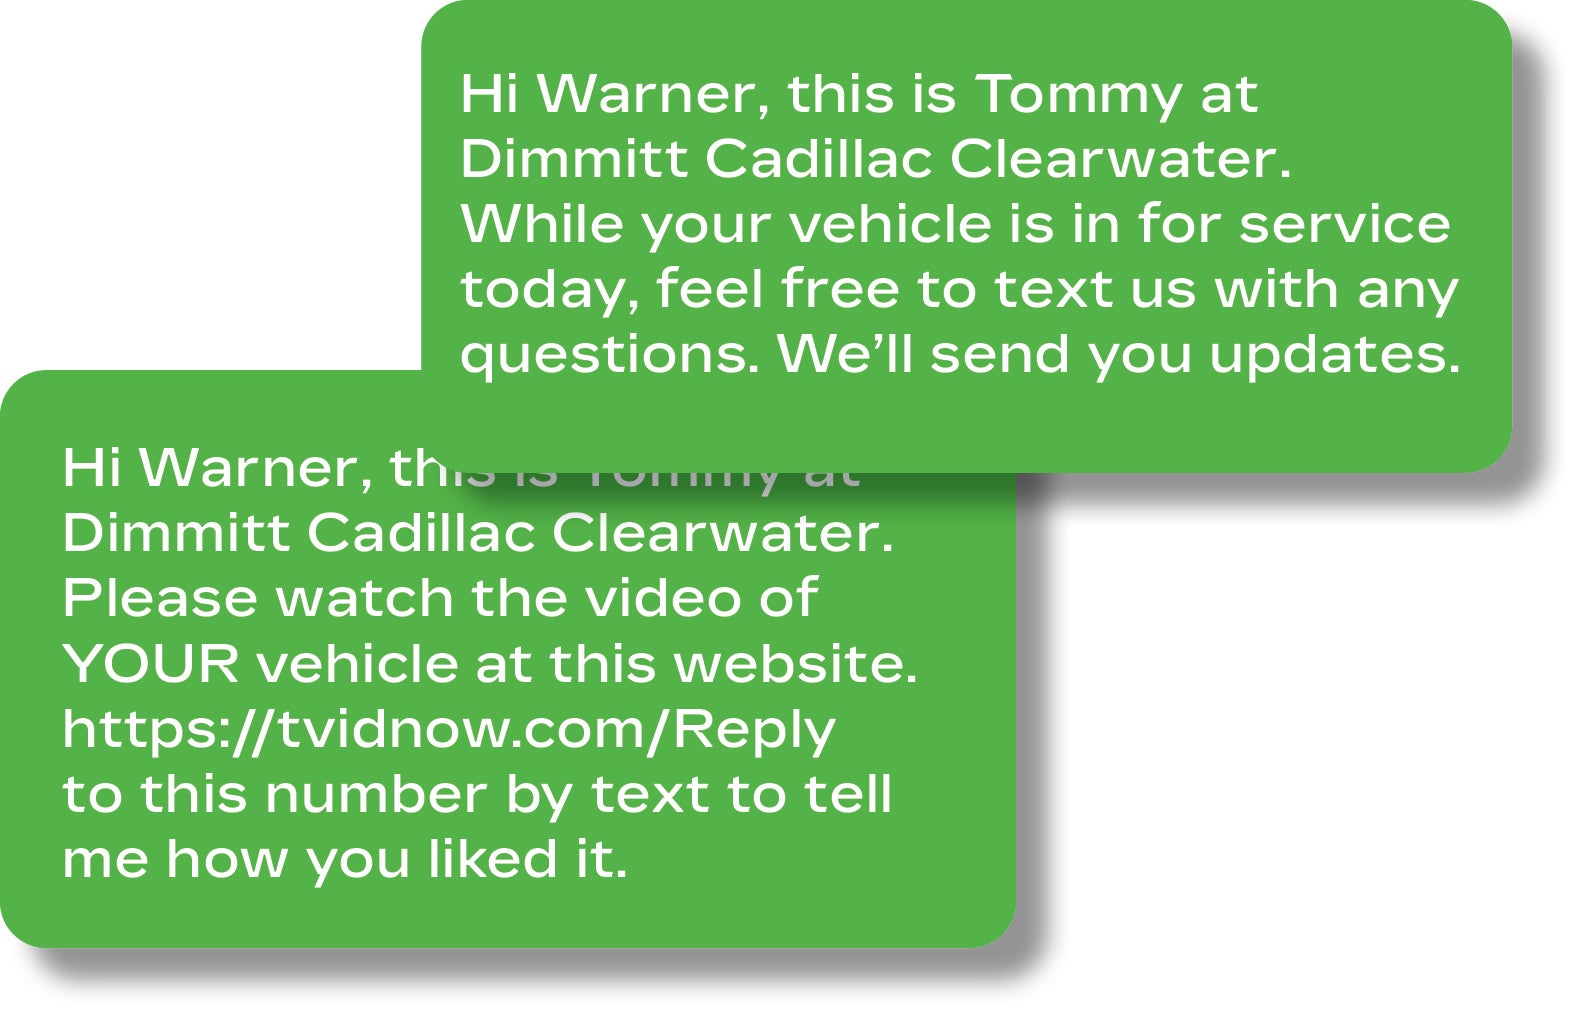 sms text about Dimmitt Cadillac Clearwater and thier new video service